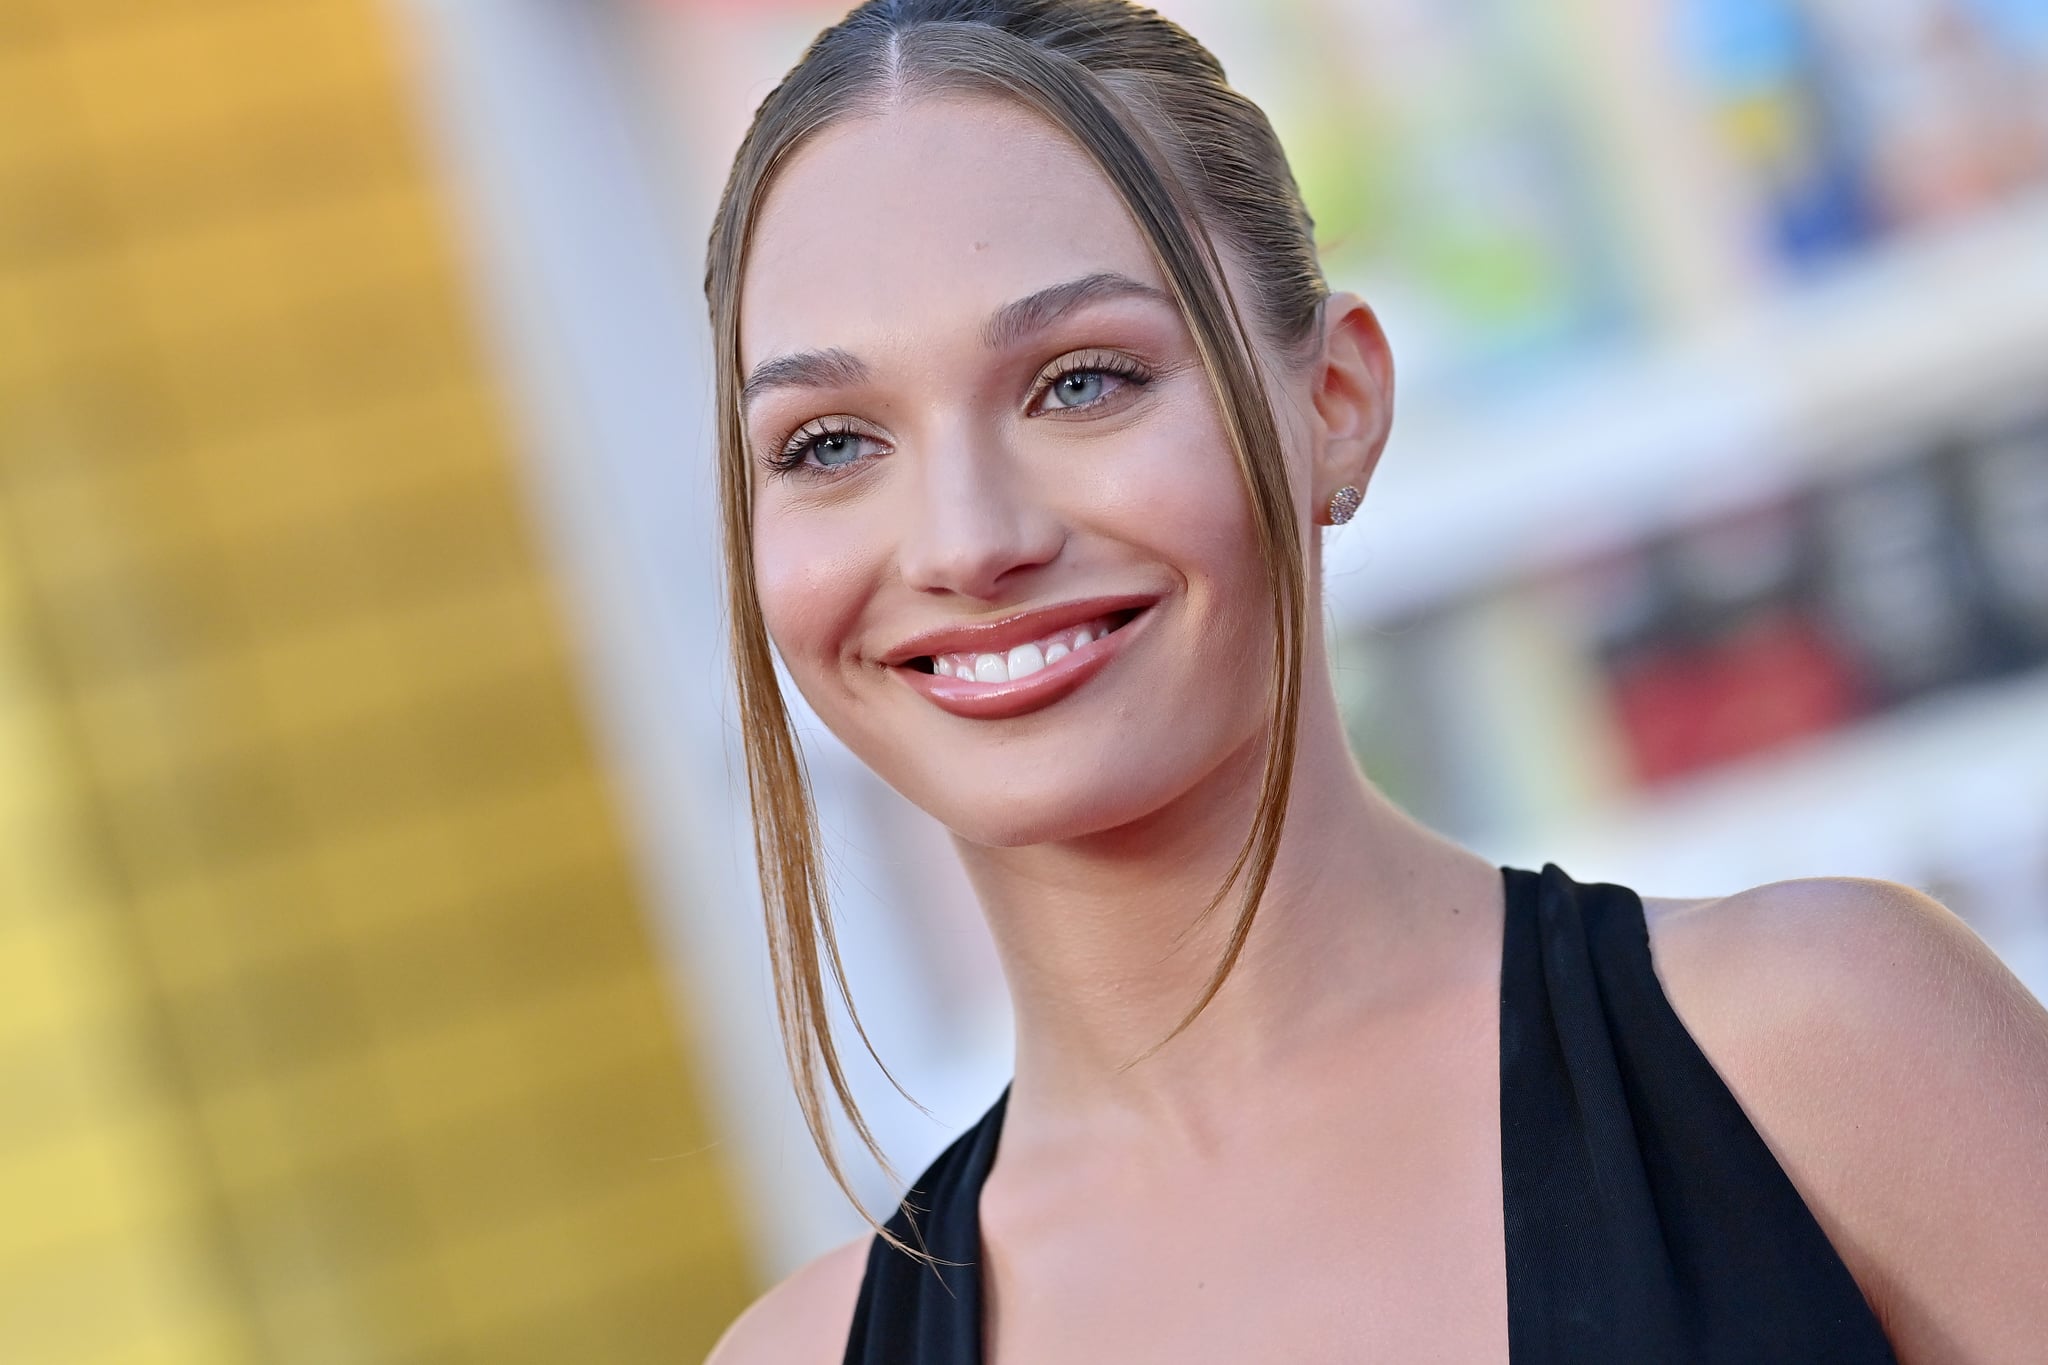 LOS ANGELES, CALIFORNIA - AUGUST 01: Maddie Ziegler attends the Los Angeles Premiere of Columbia Pictures' 